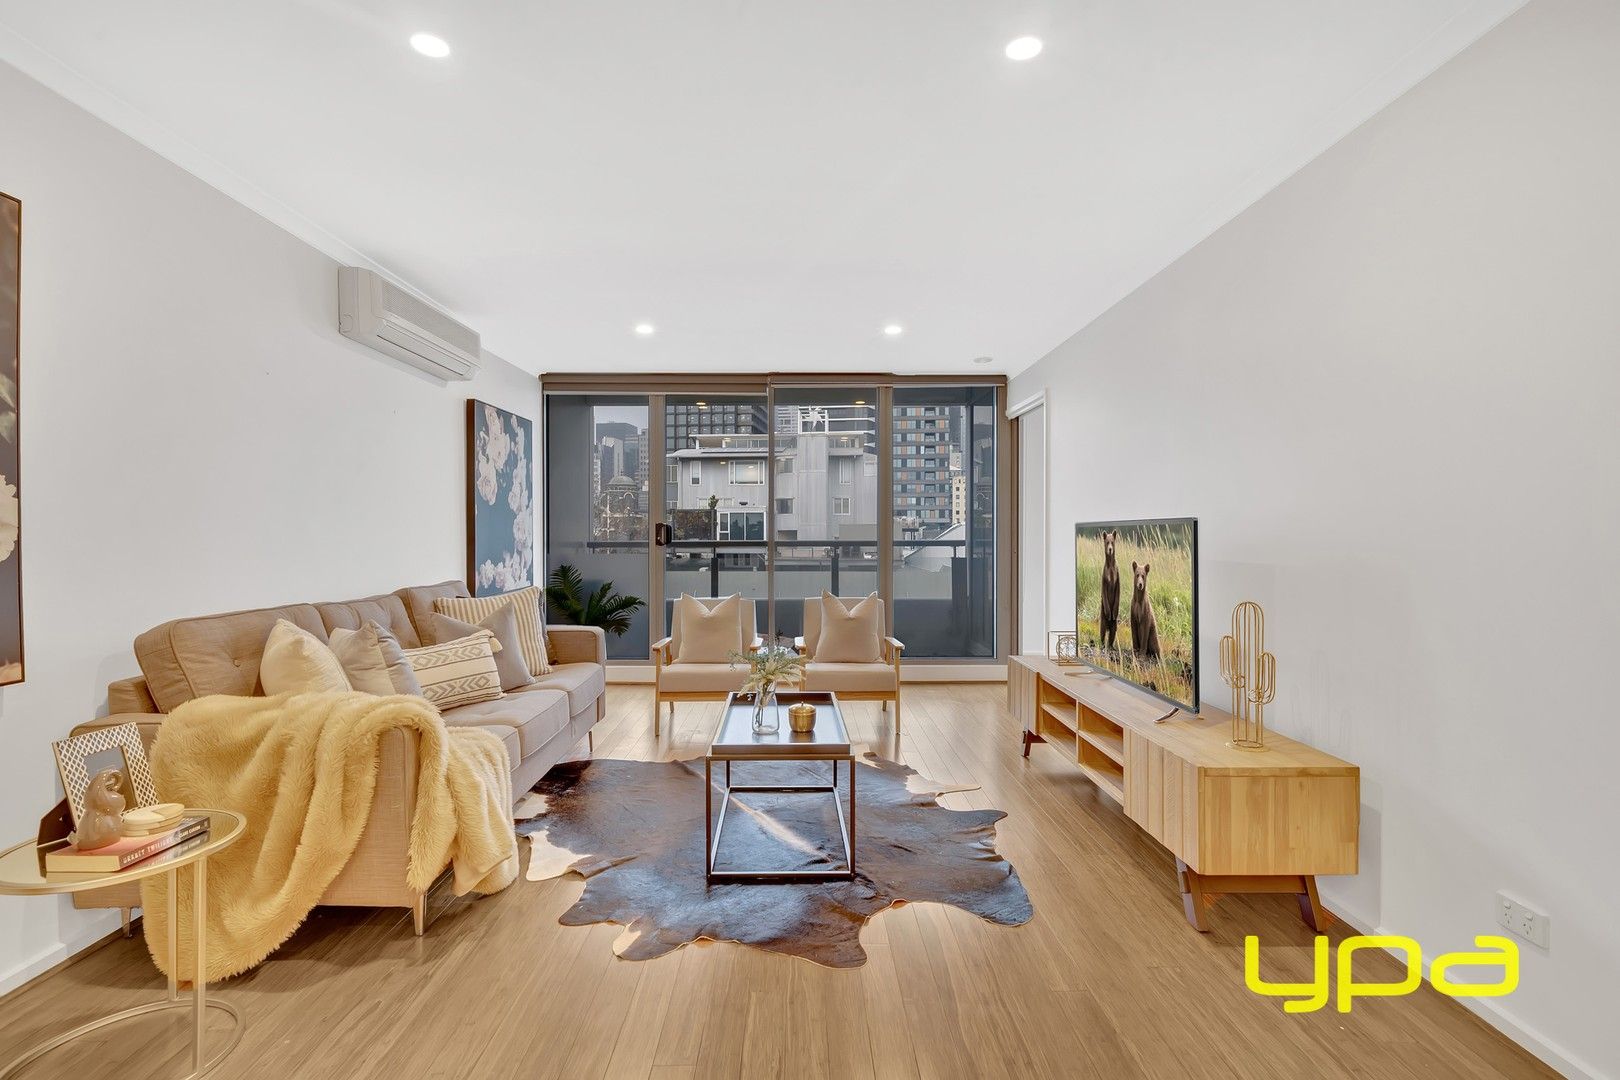 2 bedrooms Apartment / Unit / Flat in 515/118 Dudley Street WEST MELBOURNE VIC, 3003